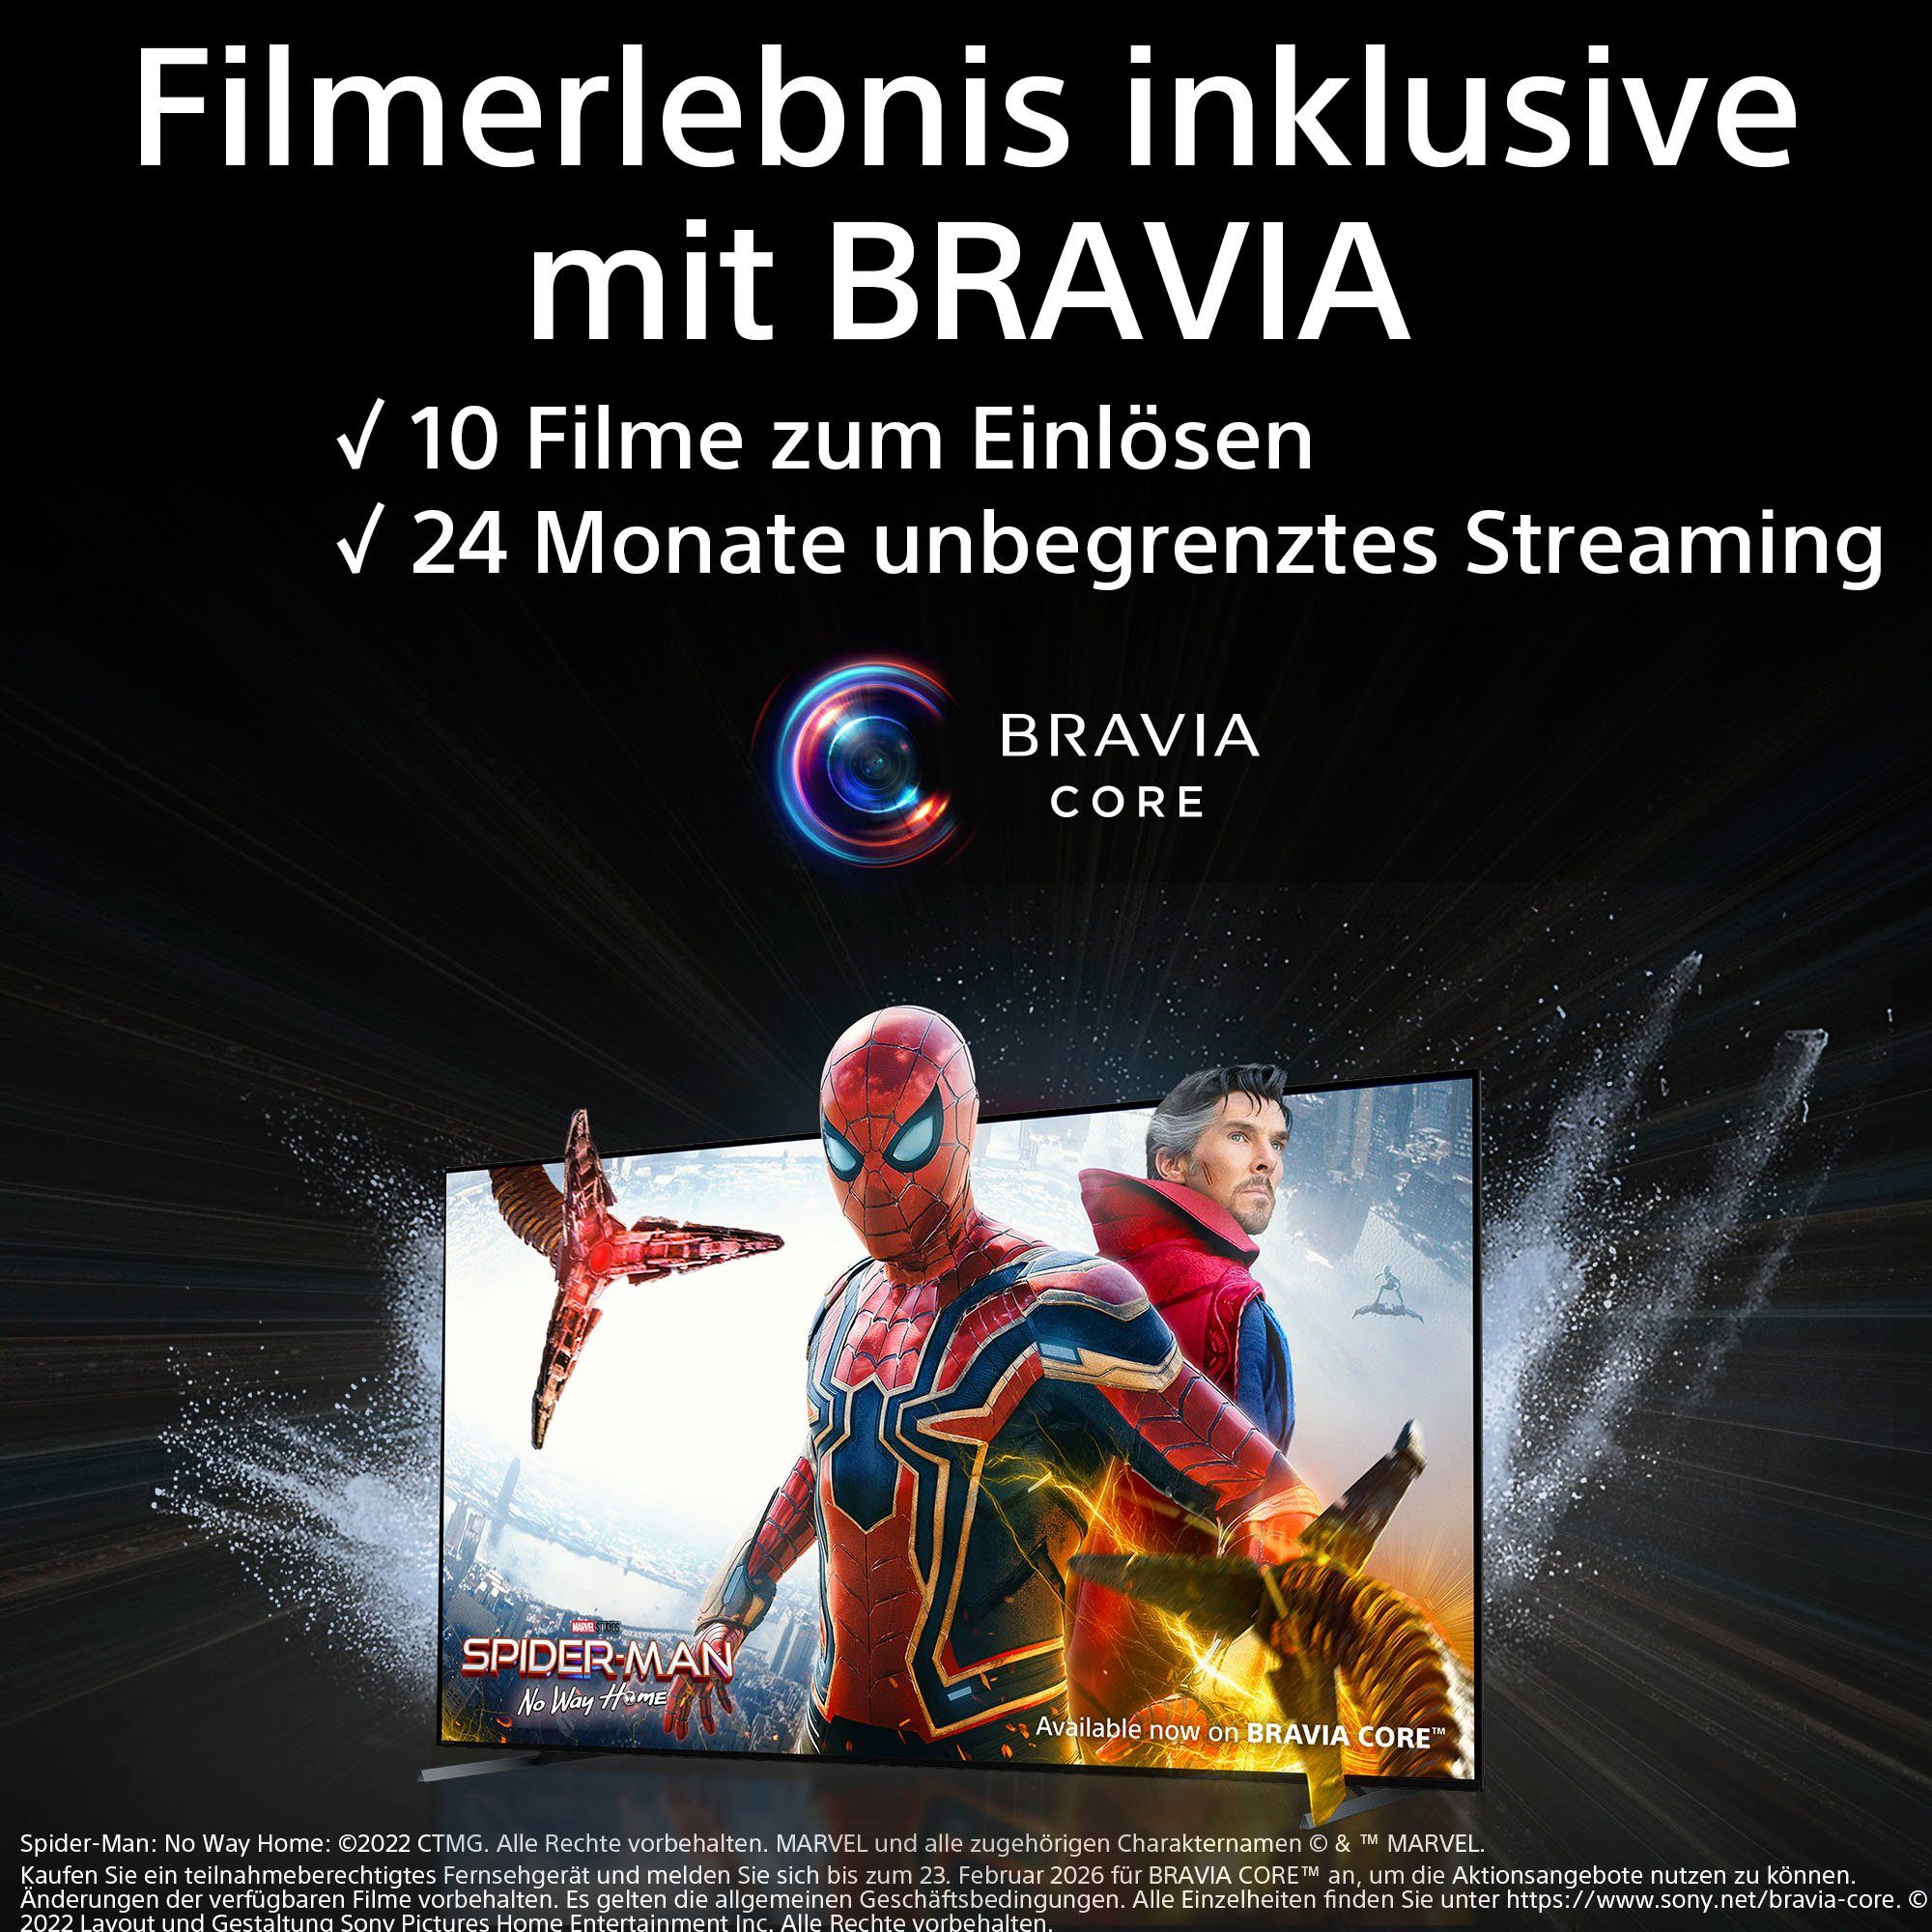 Sony XR-85X90L LED-Fernseher (215 cm/85 4K mit CORE, TRILUMINOS BRAVIA Ultra exklusiven HD, TV, PRO, Google PS5-Features) Zoll